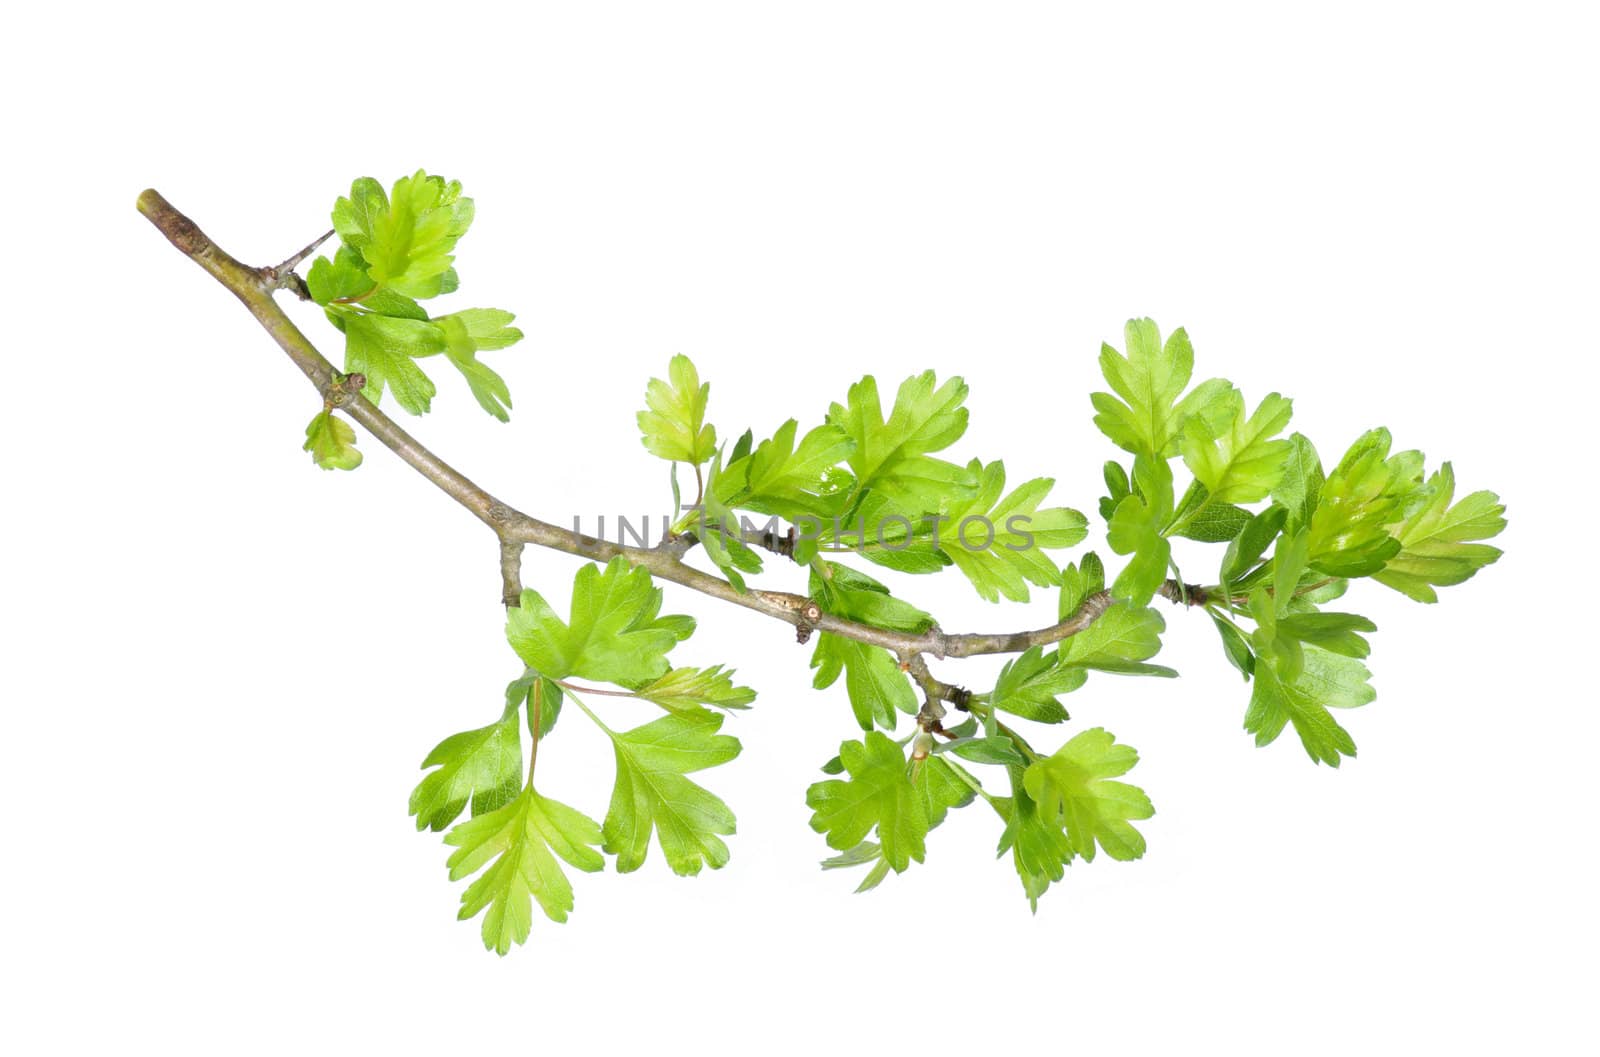 Tree branch with green leaves isolated